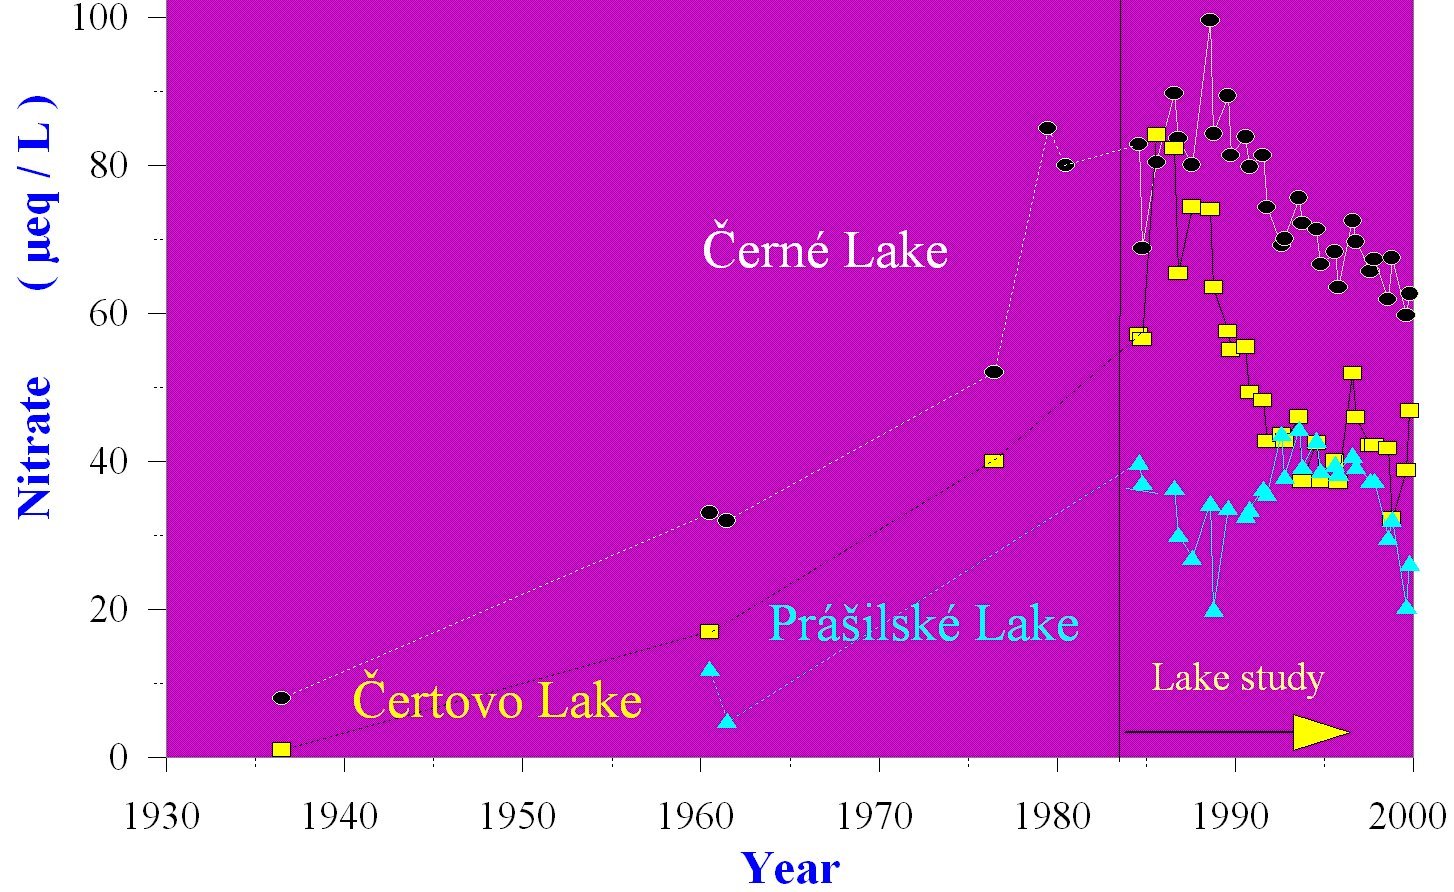 Changes in nitrate concentrations in Cerné, Certovo and Práilské lakes from 1936 to 1999.